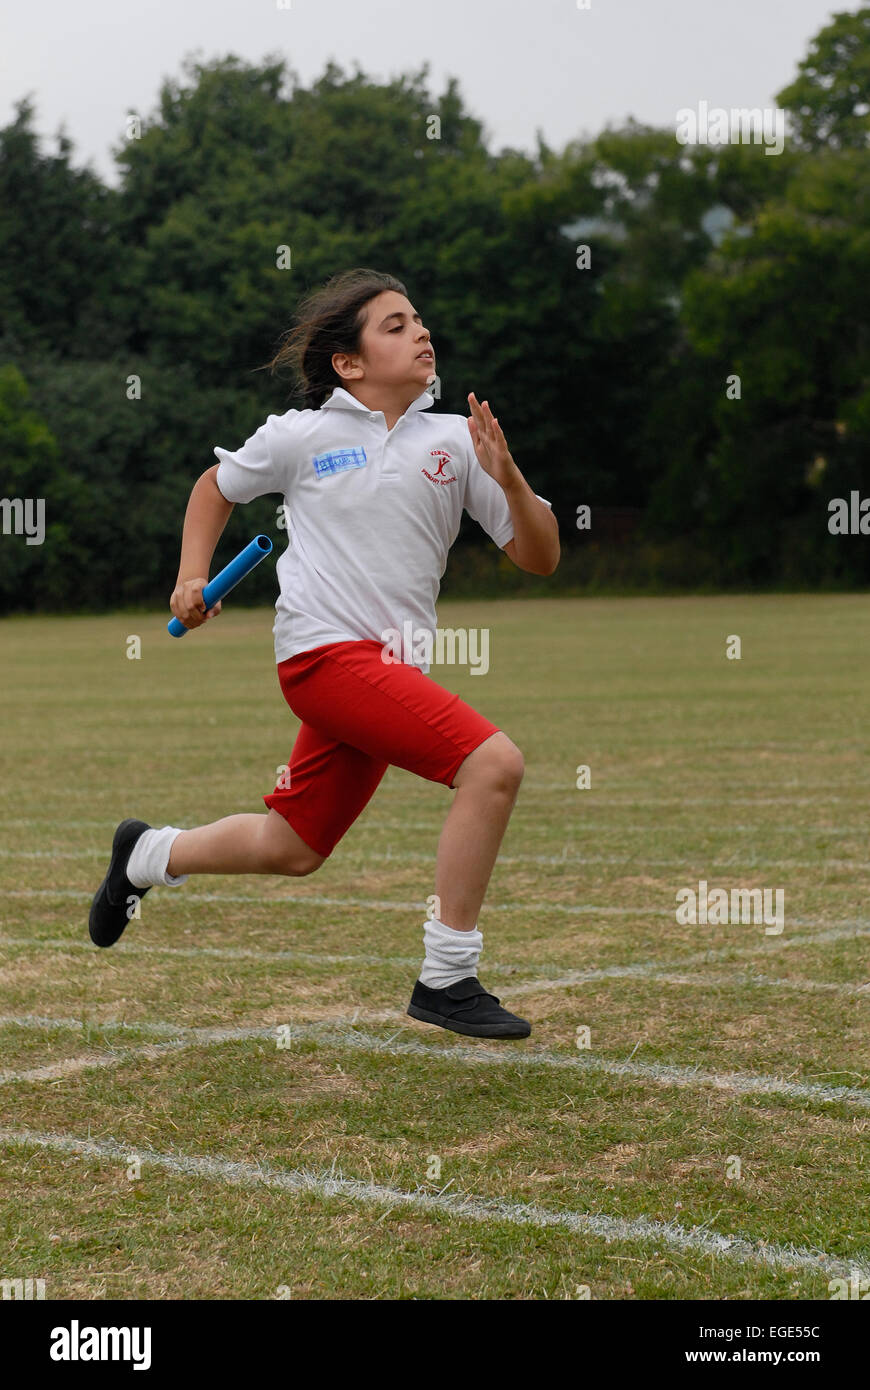 Sheer determination as part of a team relay this focused primary school girl is flying down the grass race track lines Stock Photo